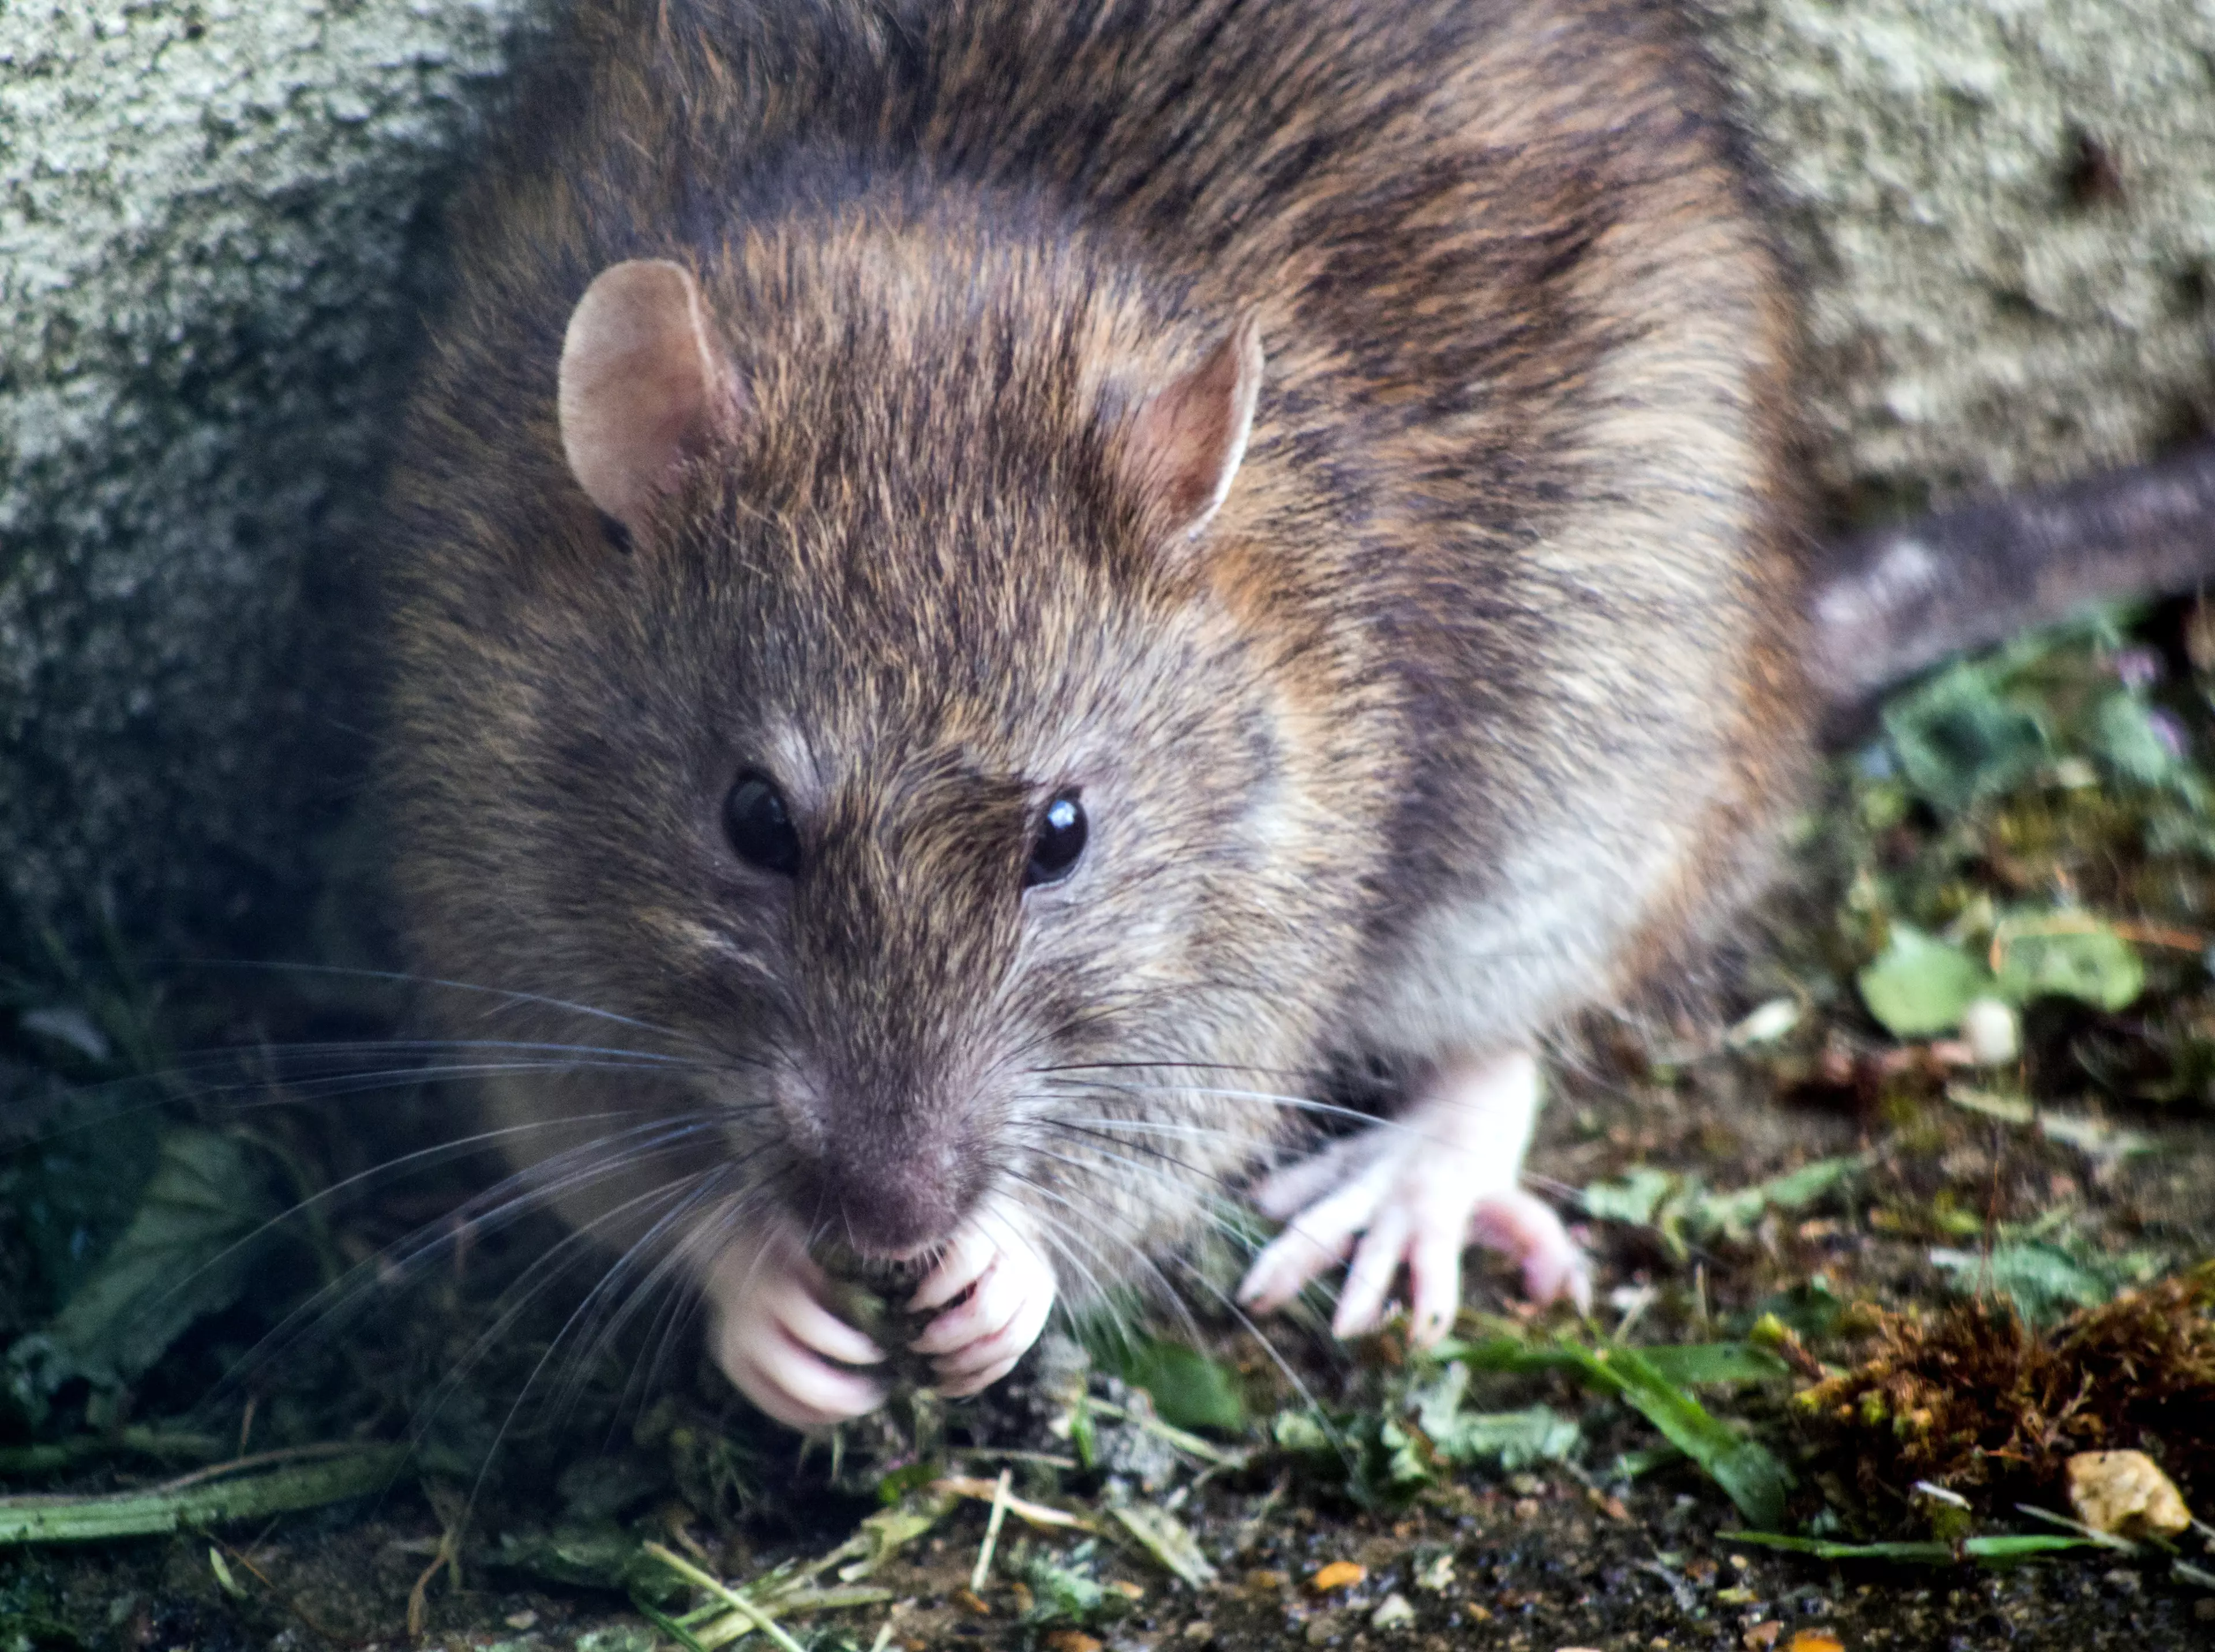 There has been a 22% increase in rat enquiries (